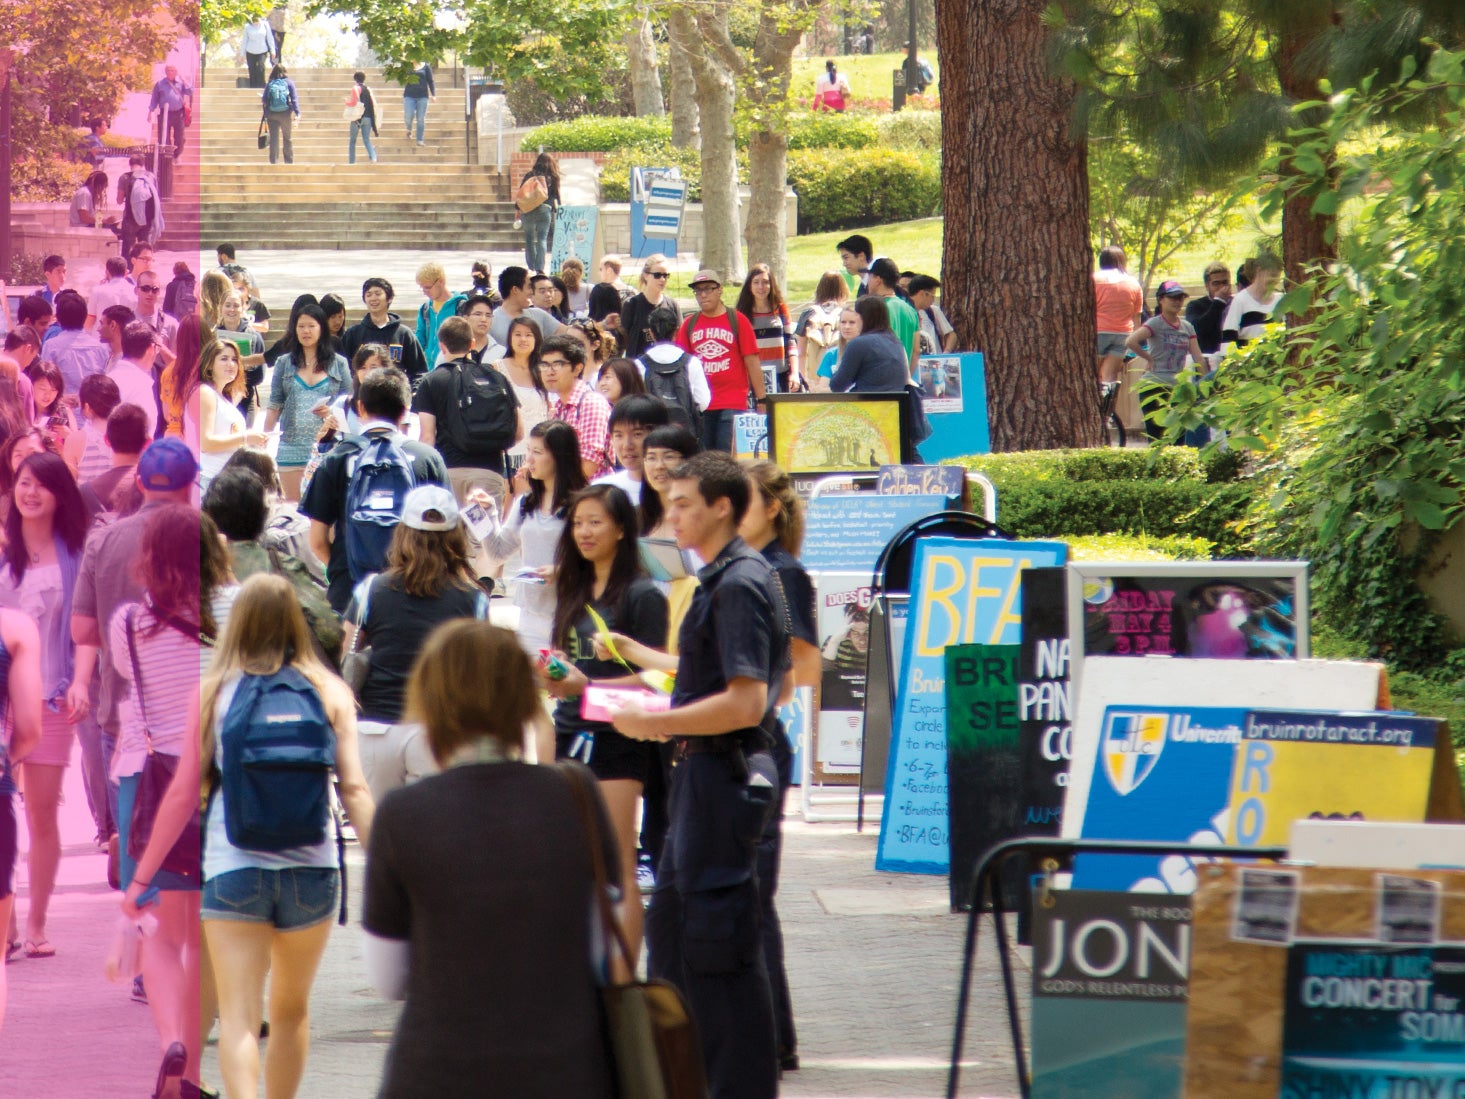 Students make their way down Bruin Walk, passing posters for student clubs and organizations.